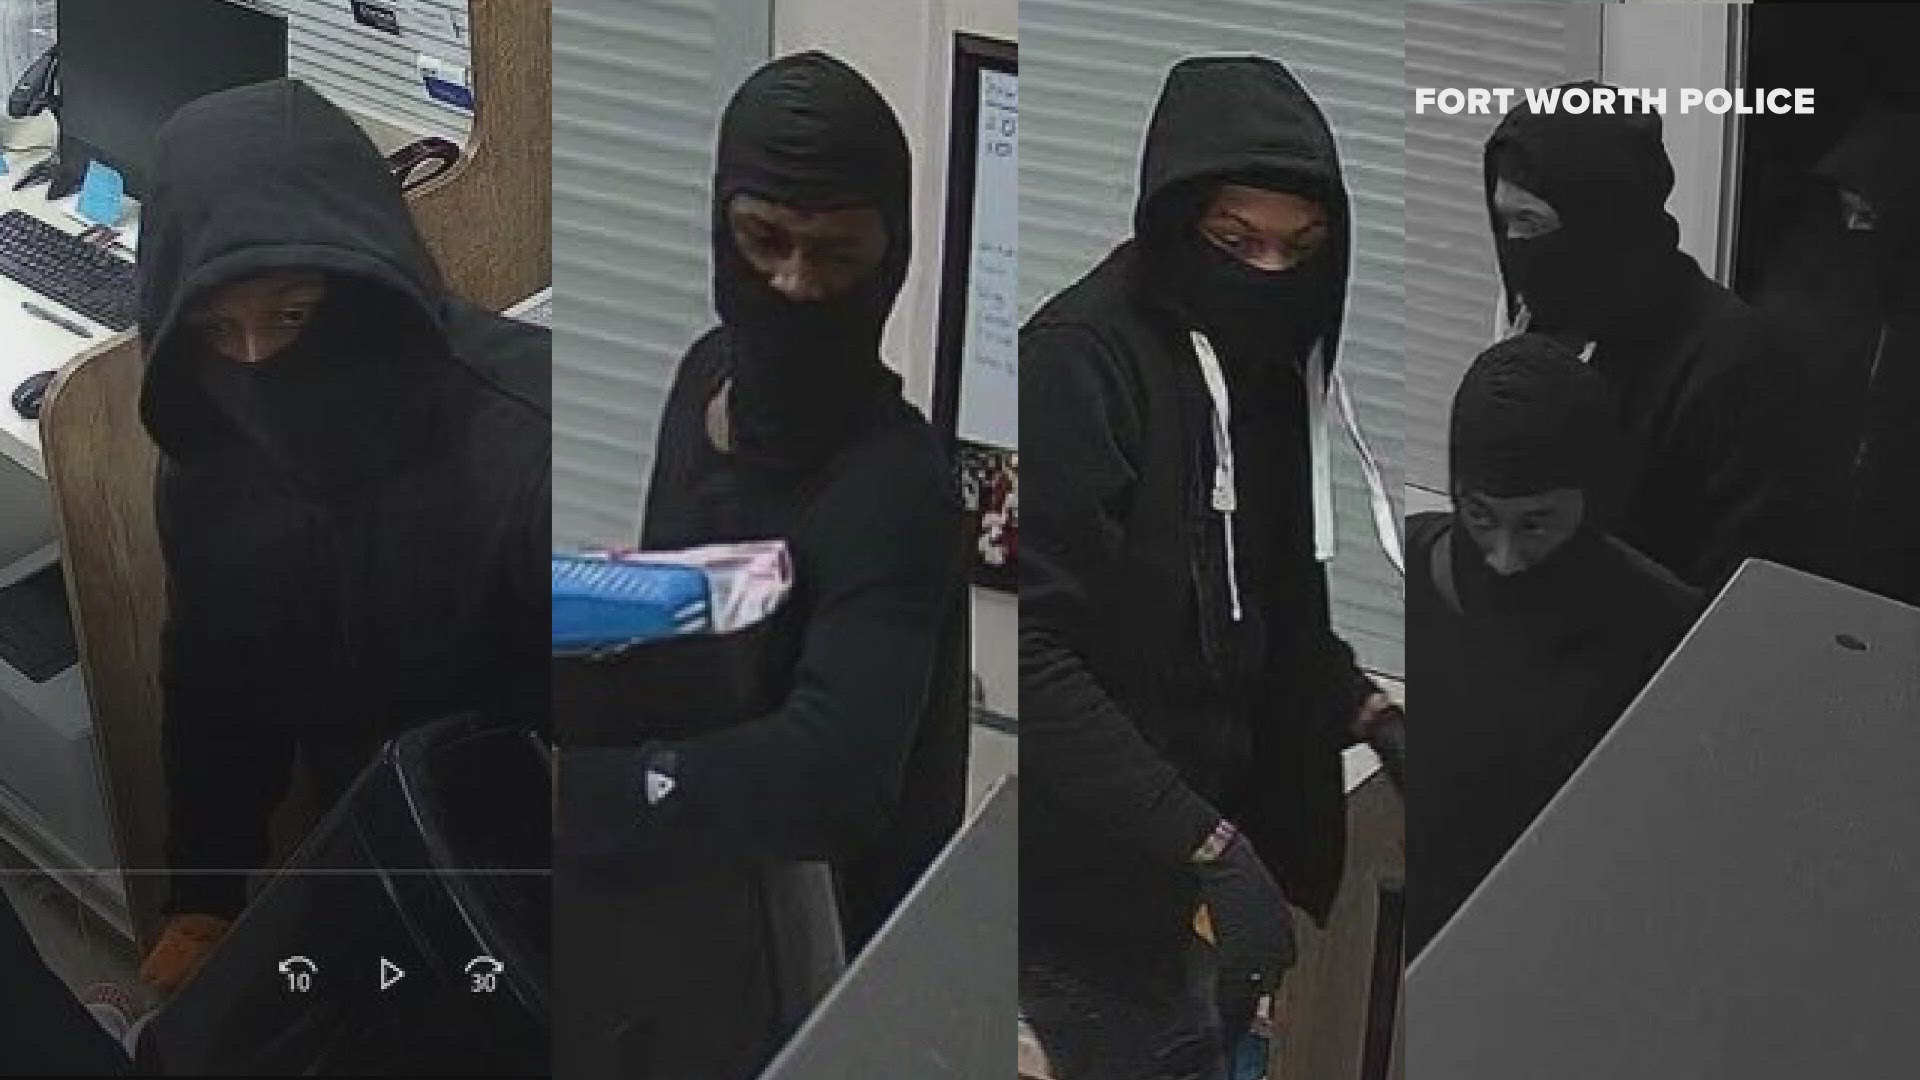 The suspects stole thousands of dollars worth of prescription drugs.